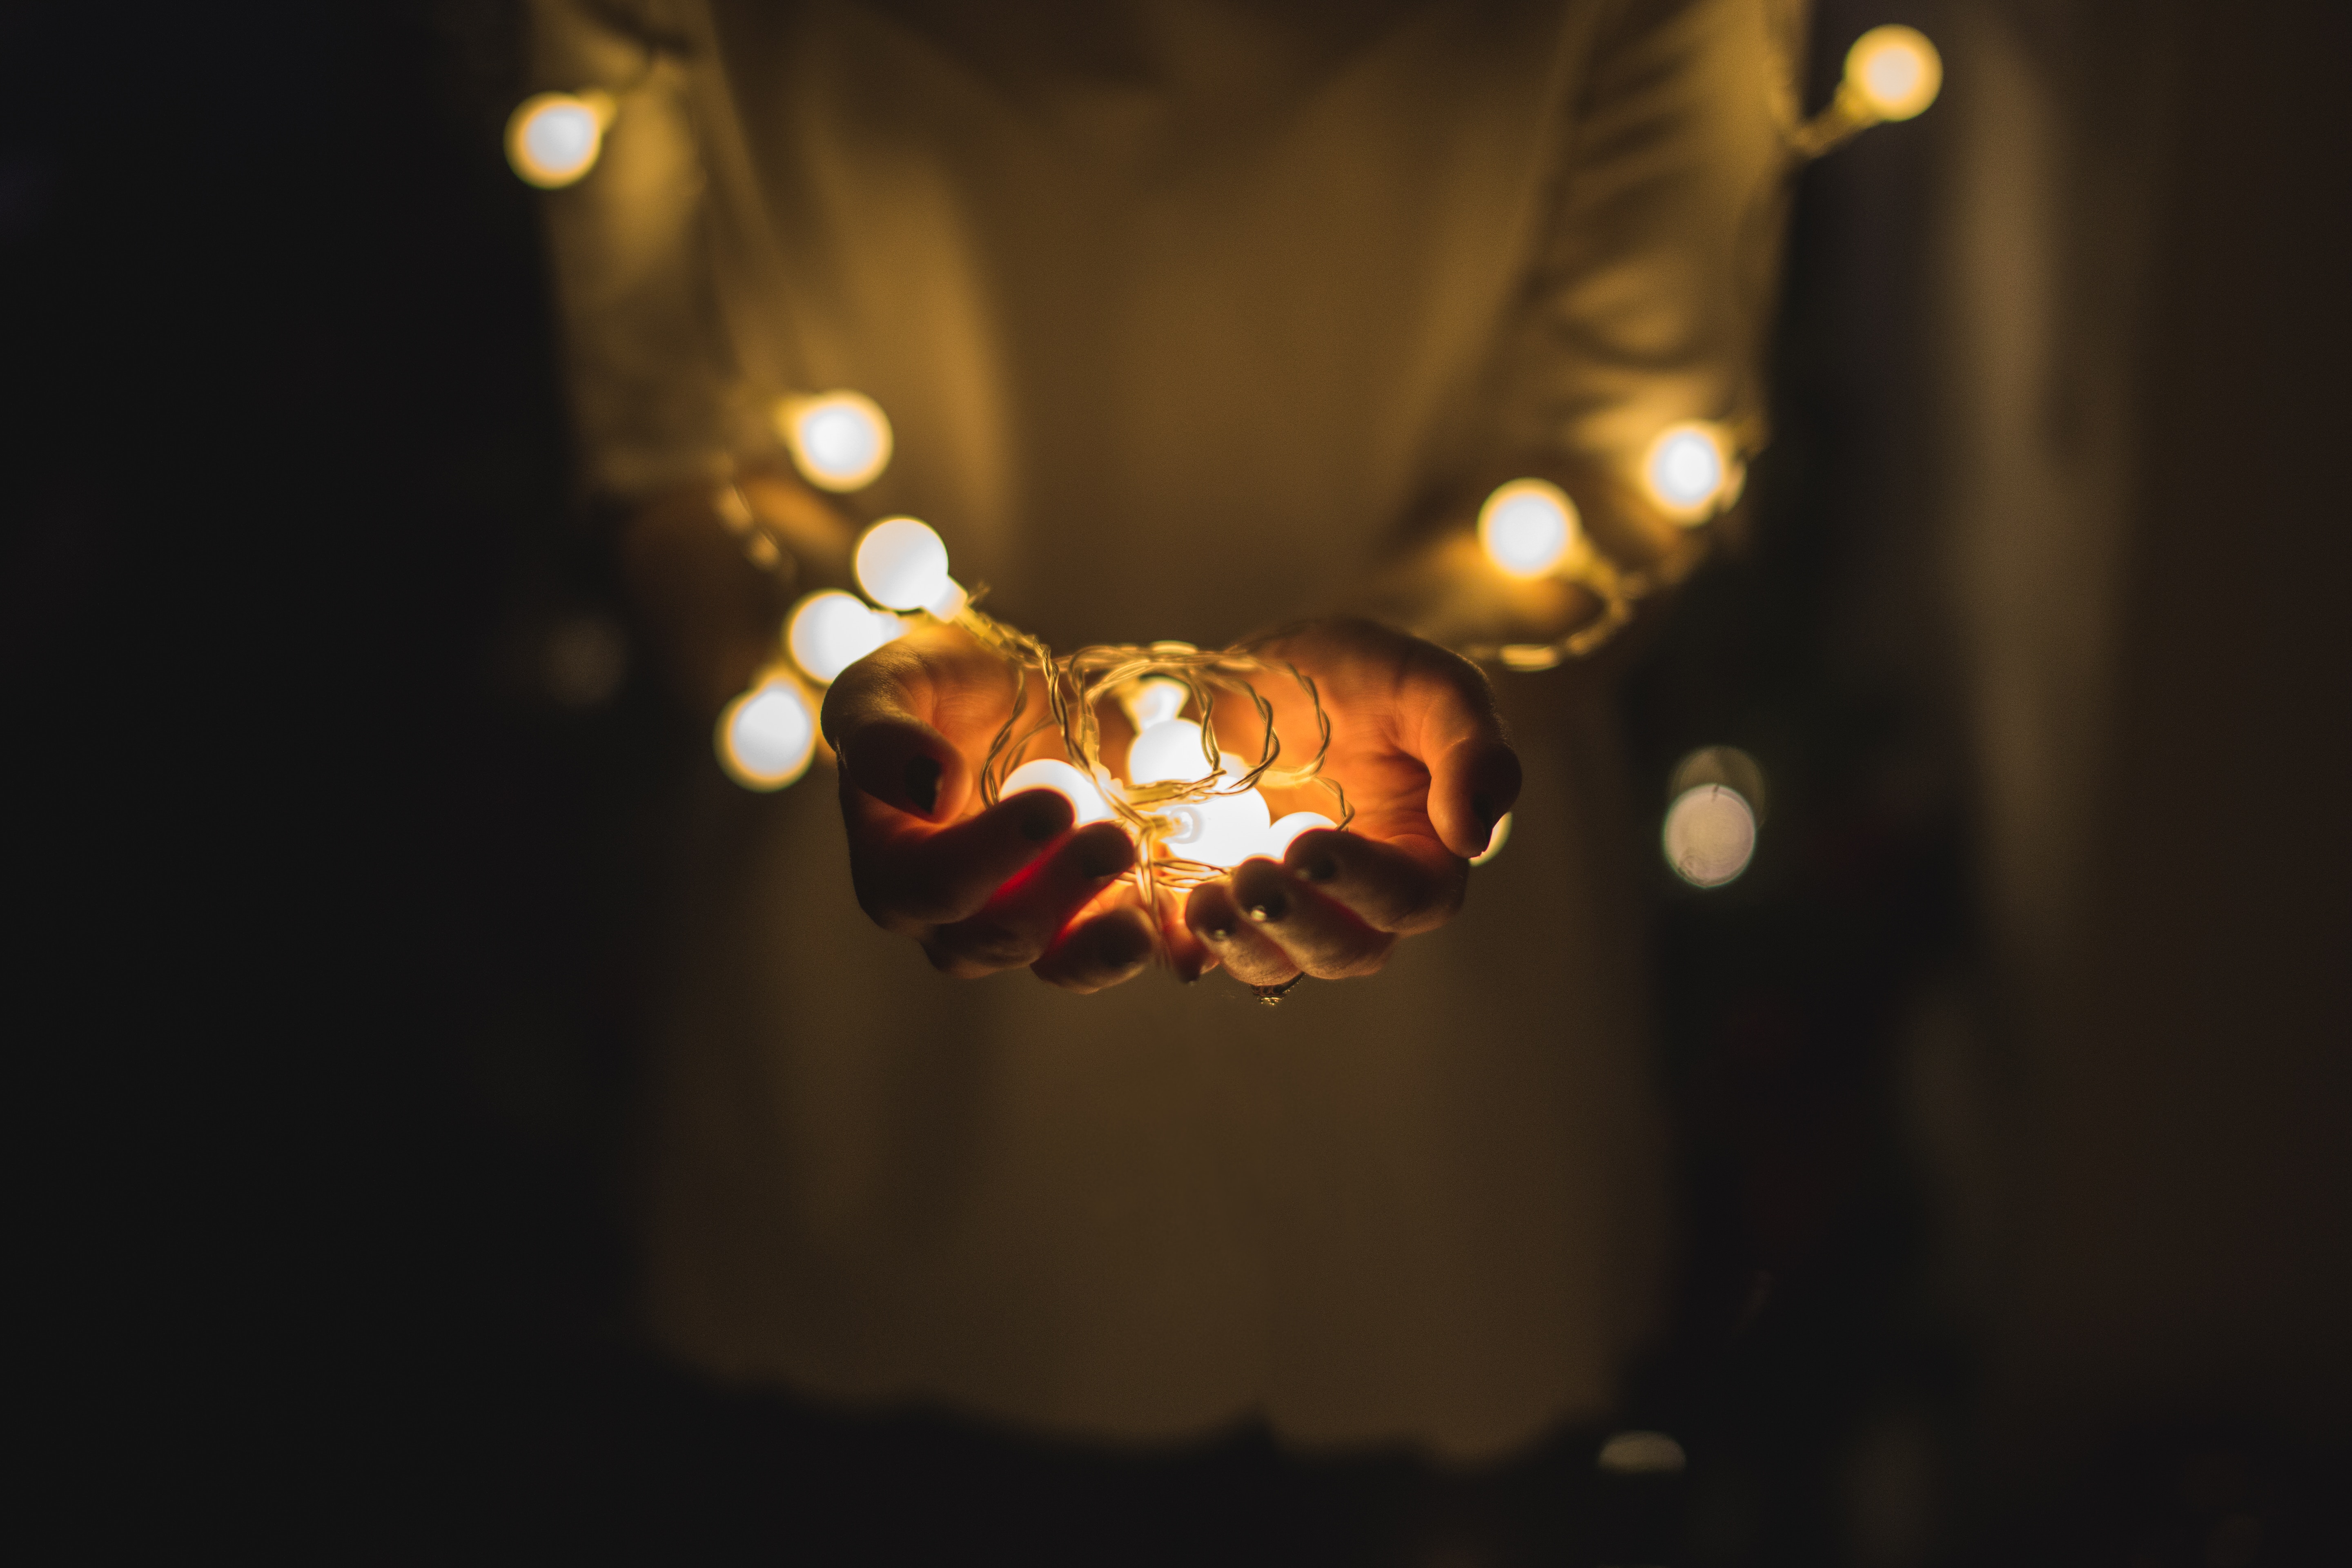 Arms, hands and torso of person in white shirt. Arms wrapped in a string of white lights. Lights are pooled into hands, and the hands are cupped in front and held out as if in offering.